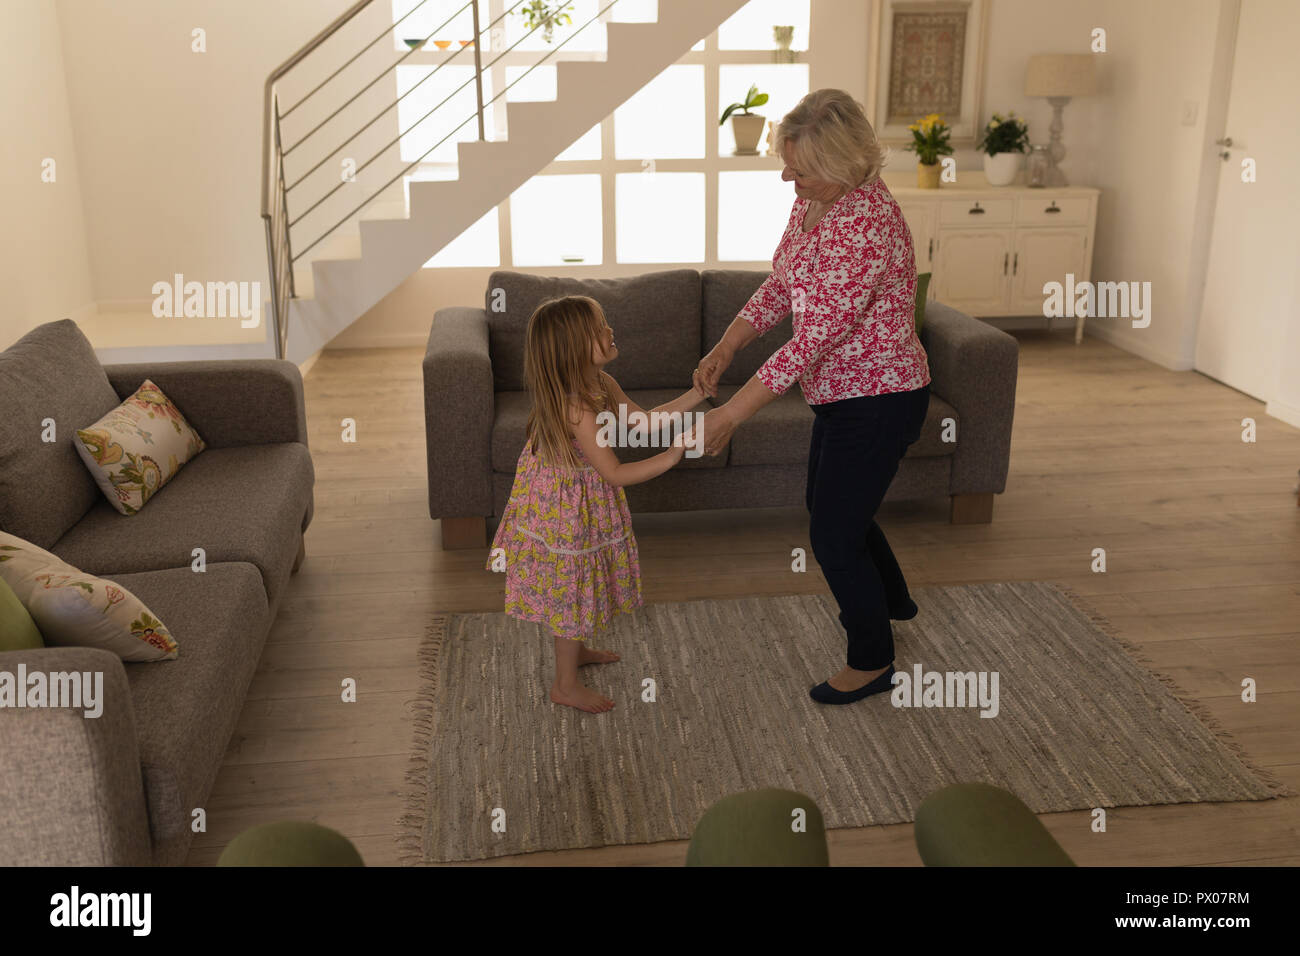 Grandmother and granddaughter dancing in living room Stock Photo